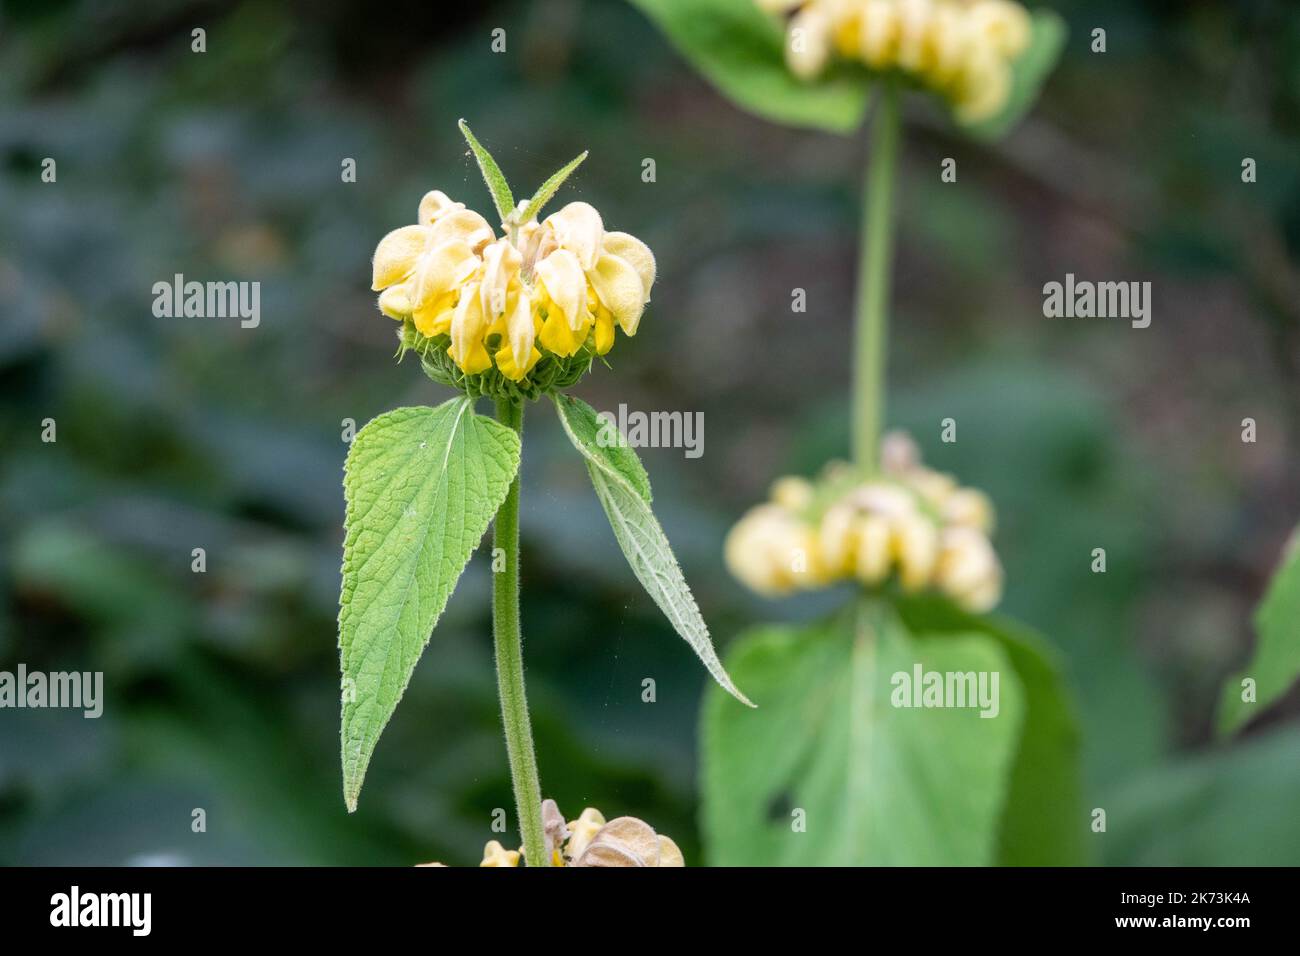 golden yellow flowers of turkish sage phlomis russeliana with a blurred green background Stock Photo